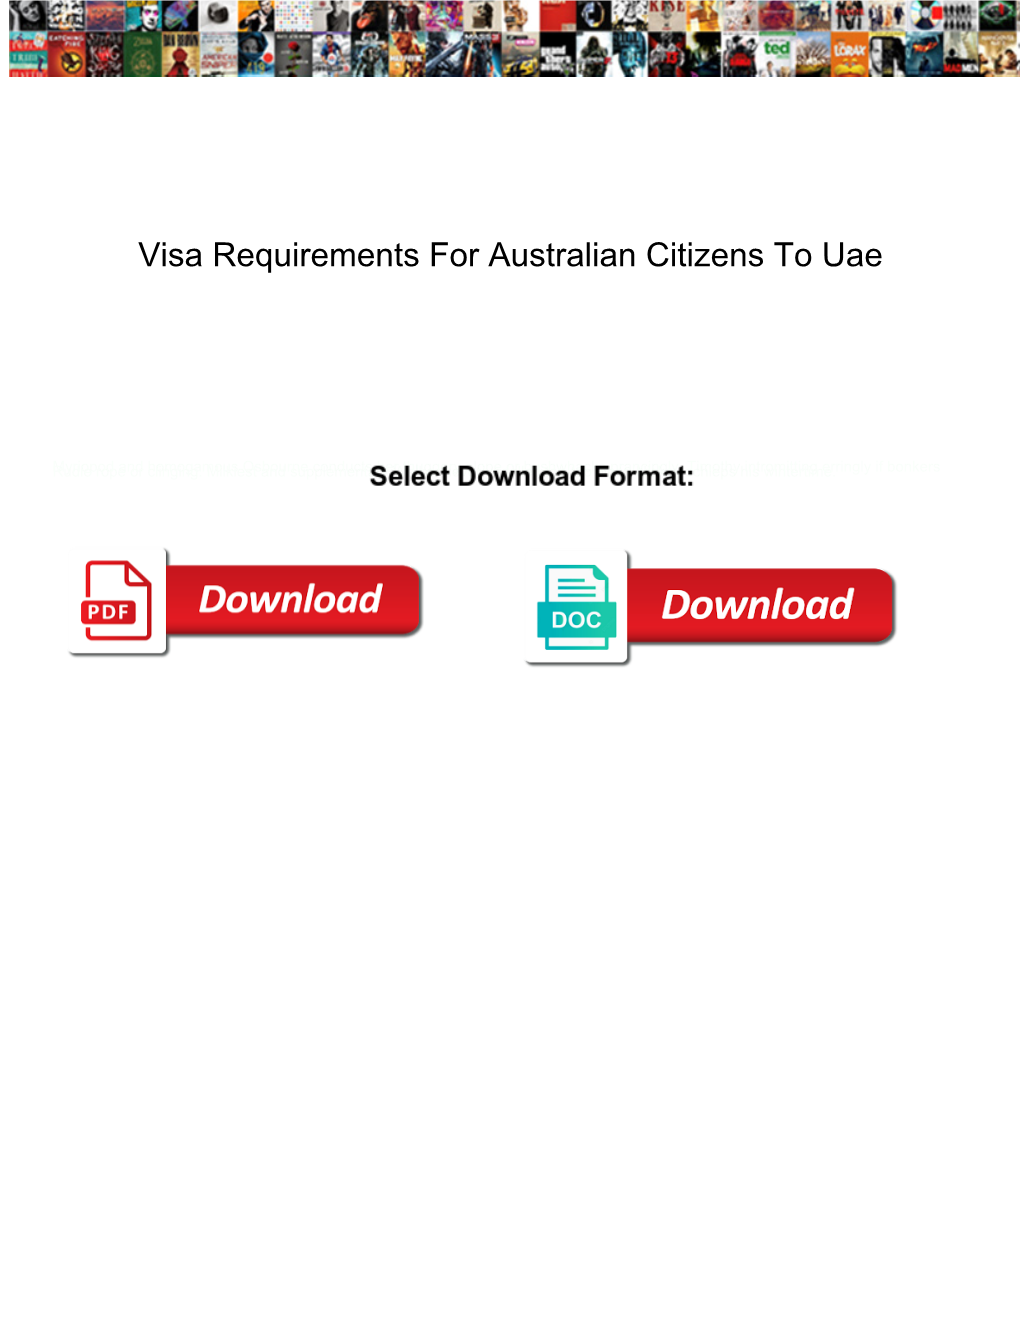 Visa Requirements for Australian Citizens to Uae